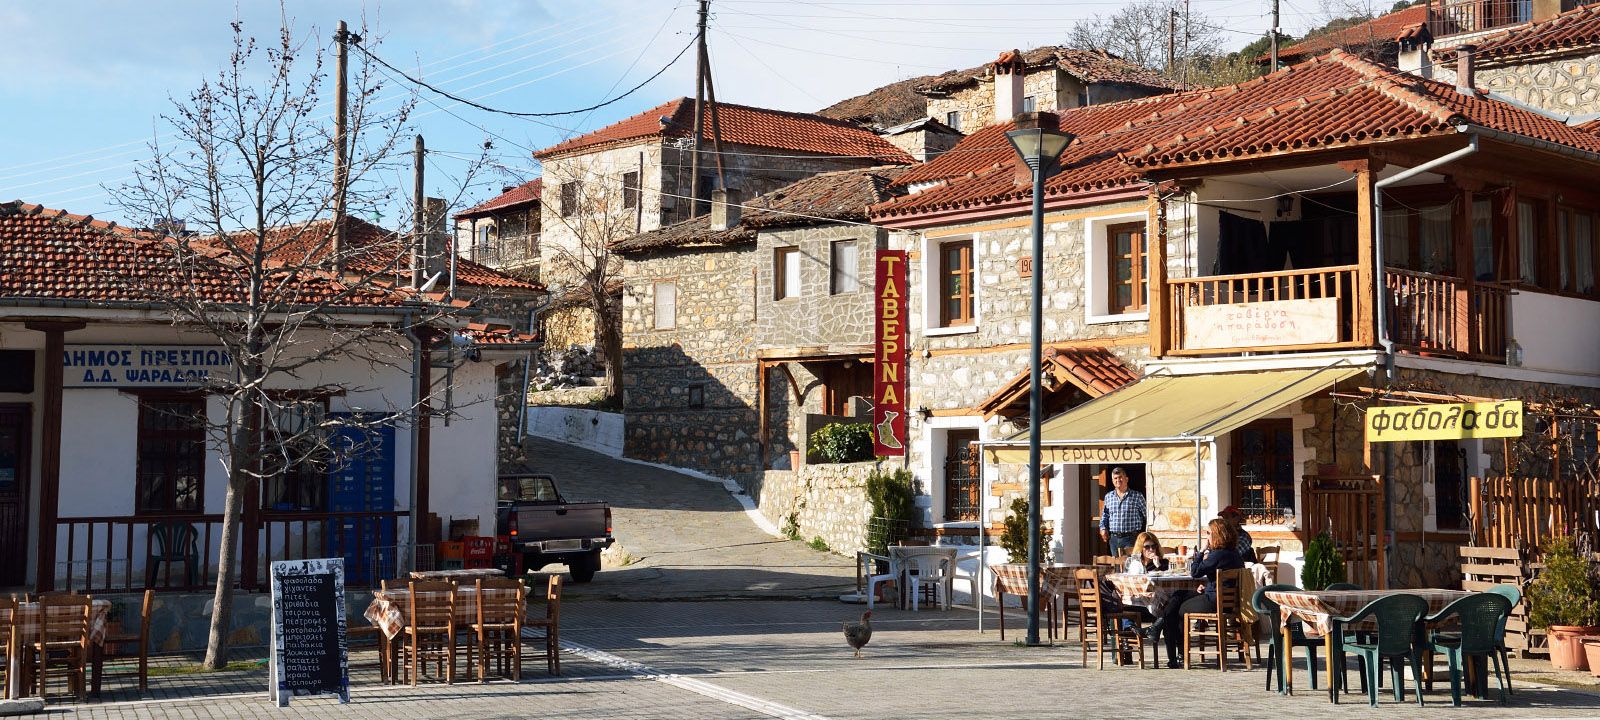 The destination of Florina for an excursion with Greek Adventures